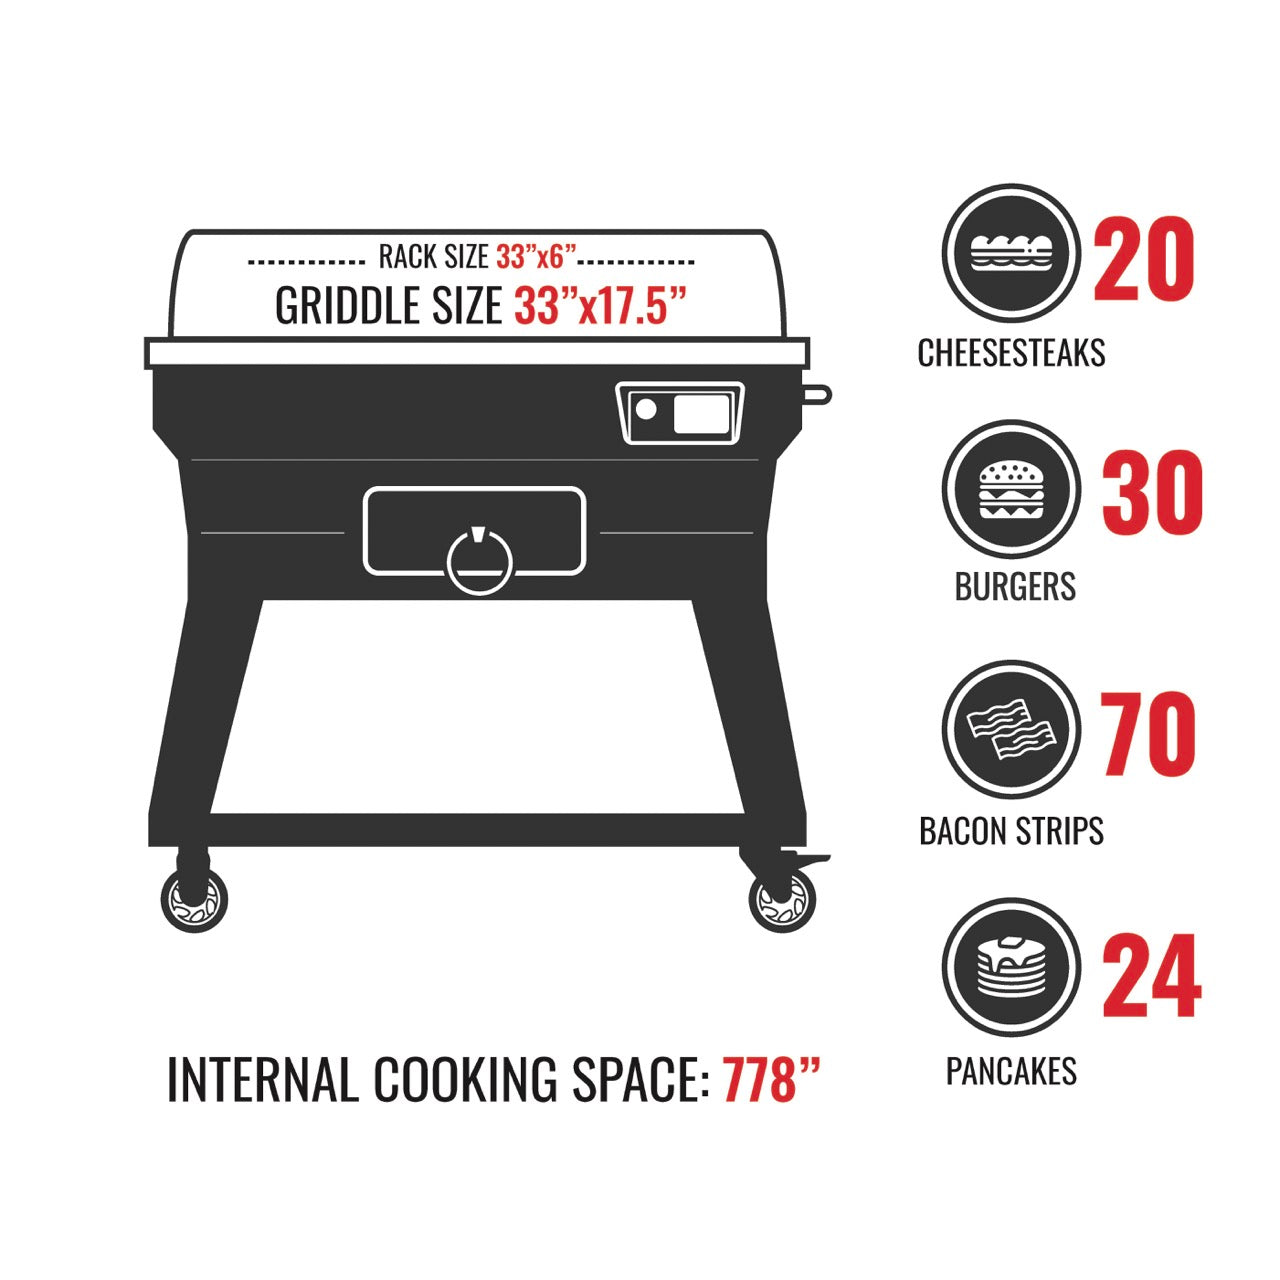 Cartoon picture of the SmokeStone 600 showing that the internal cooking space is 778